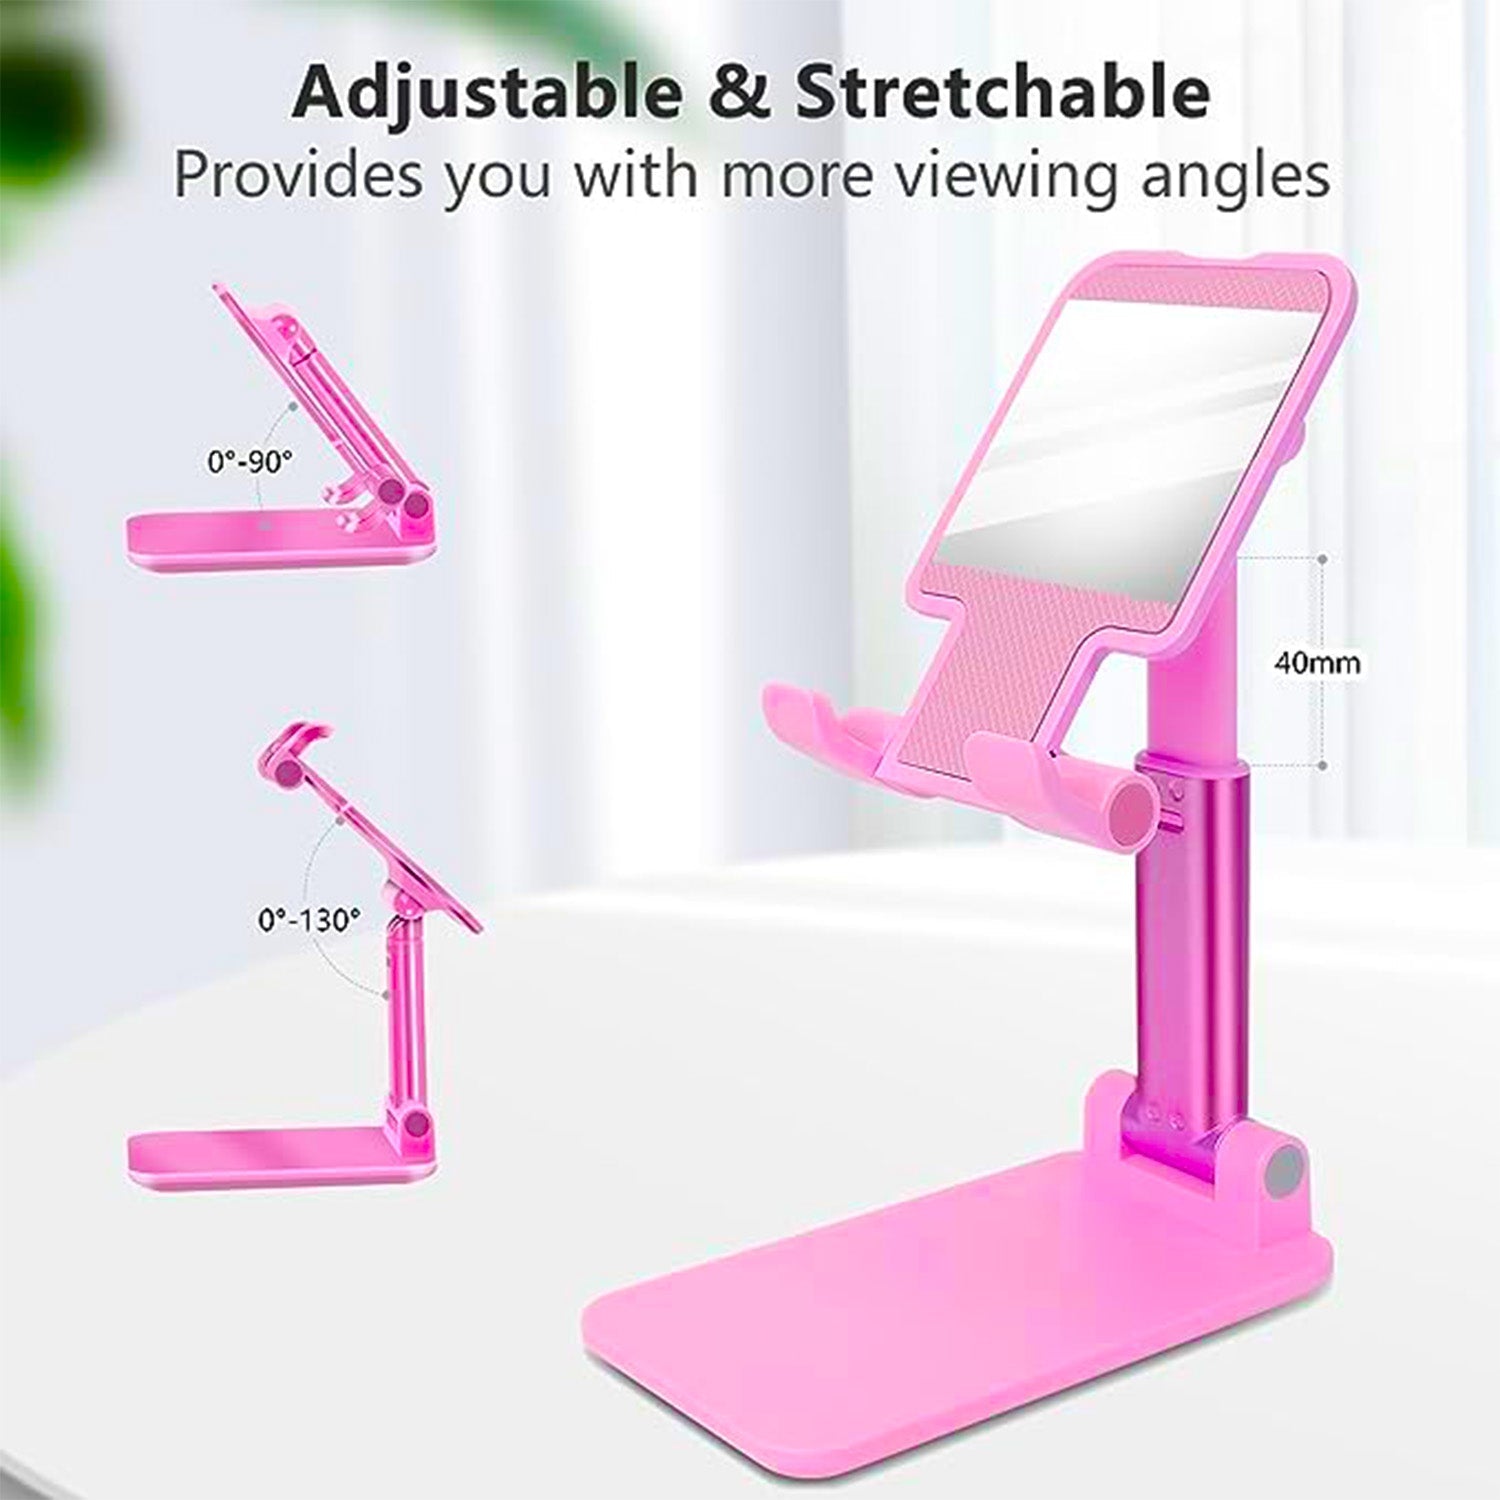 6636A DESKTOP CELL PHONE STAND PHONE HOLDER WITH MIRROR FULL 3-WAY ADJUSTABLE PHONE STAND FOR DESK HEIGHT + ANGLES PERFECT AS DESK ORGANIZERS AND ACCESSORIES